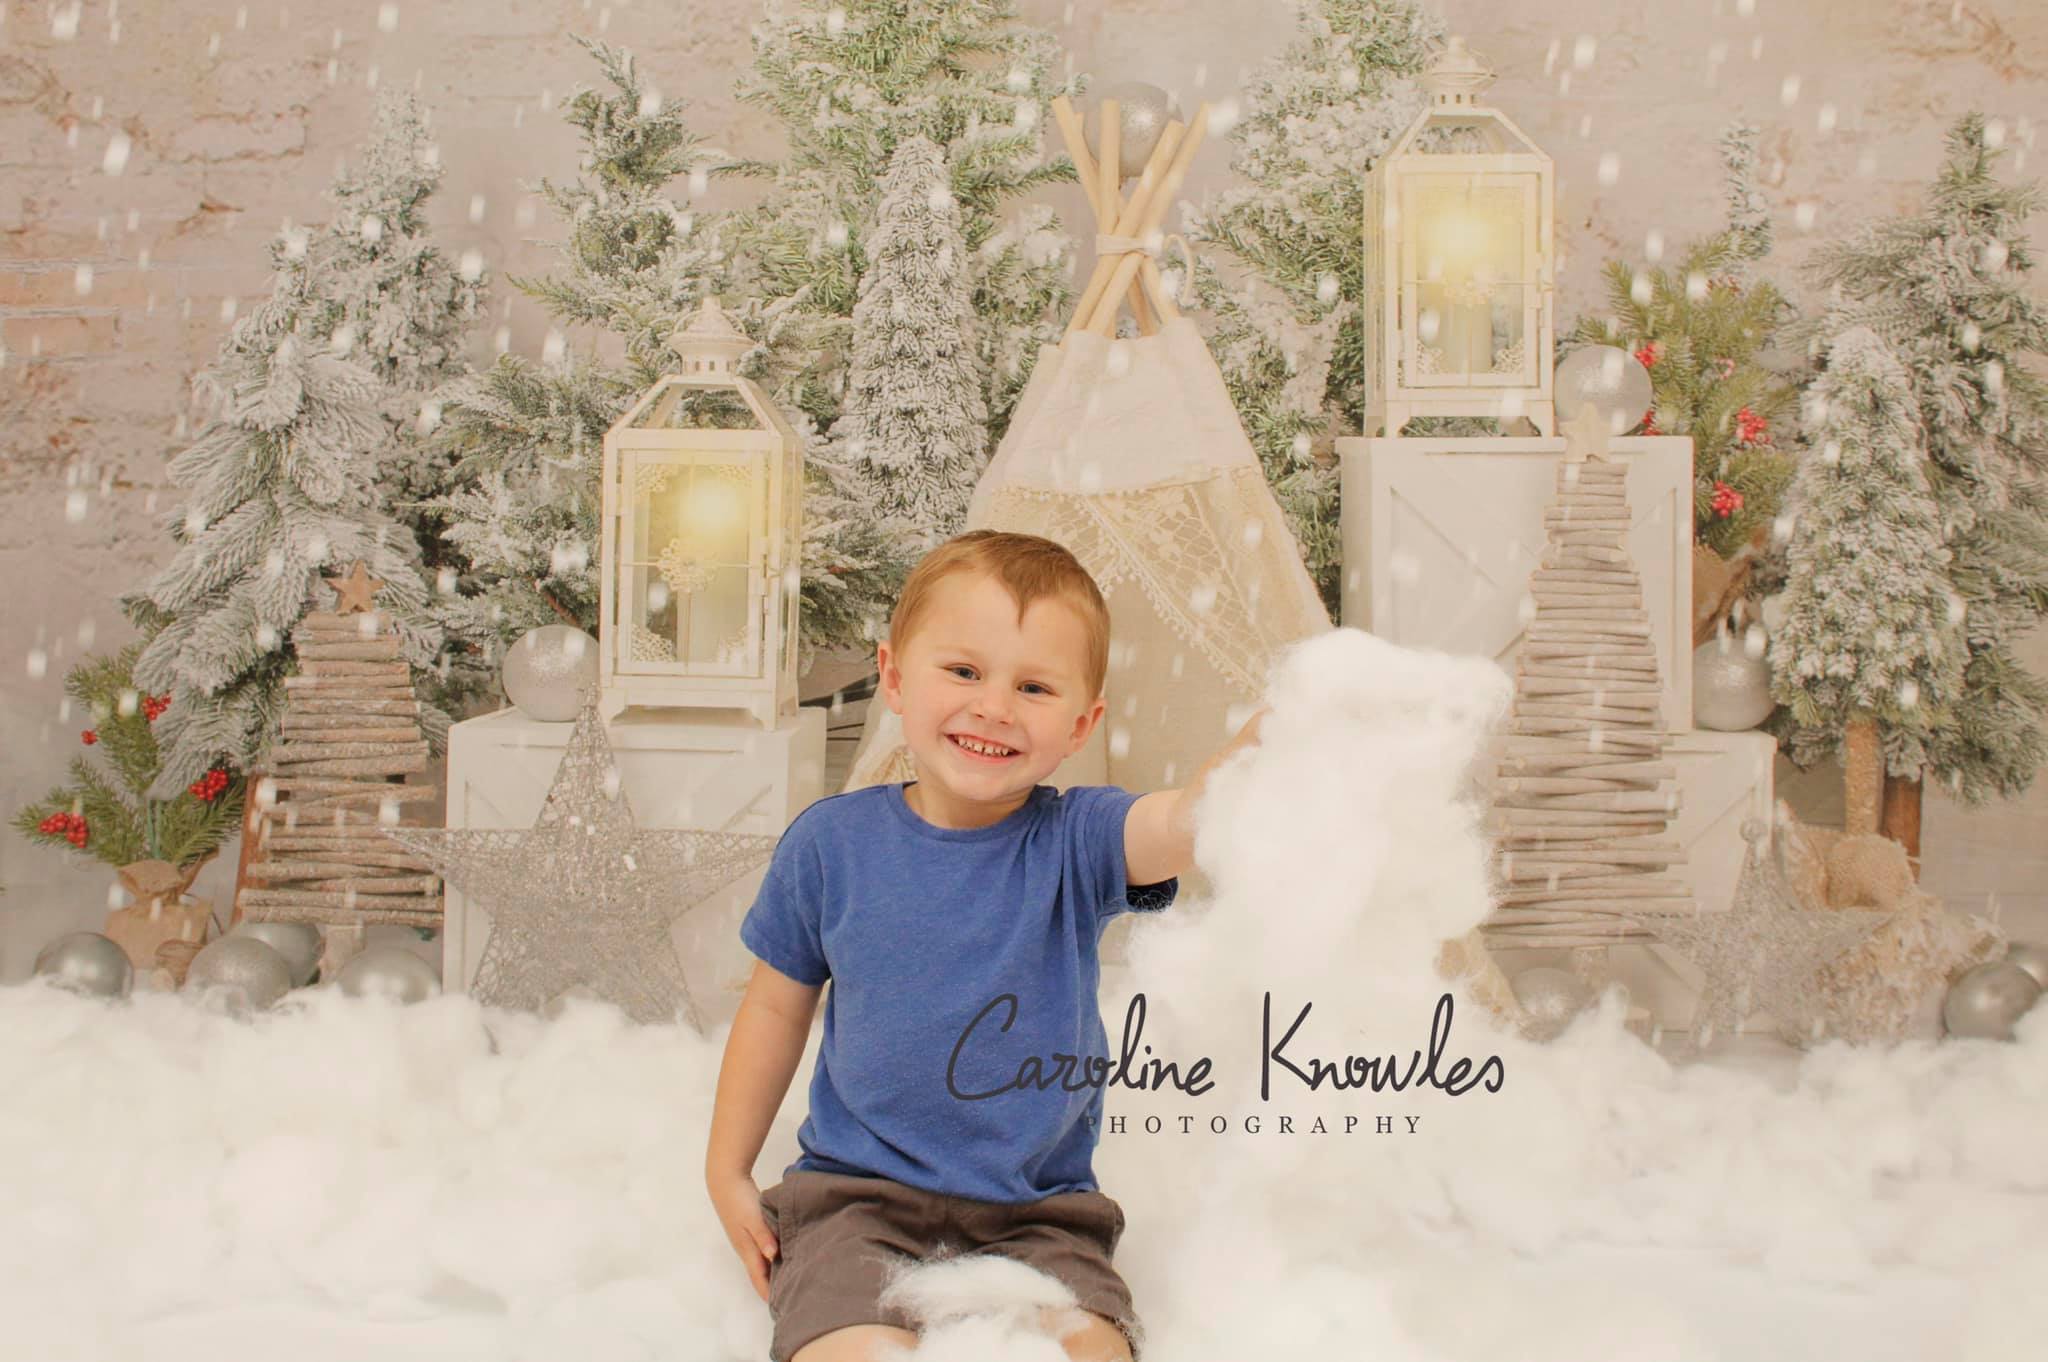 Kate Christmas Trees Tent Backdrop Designed by Emetselch